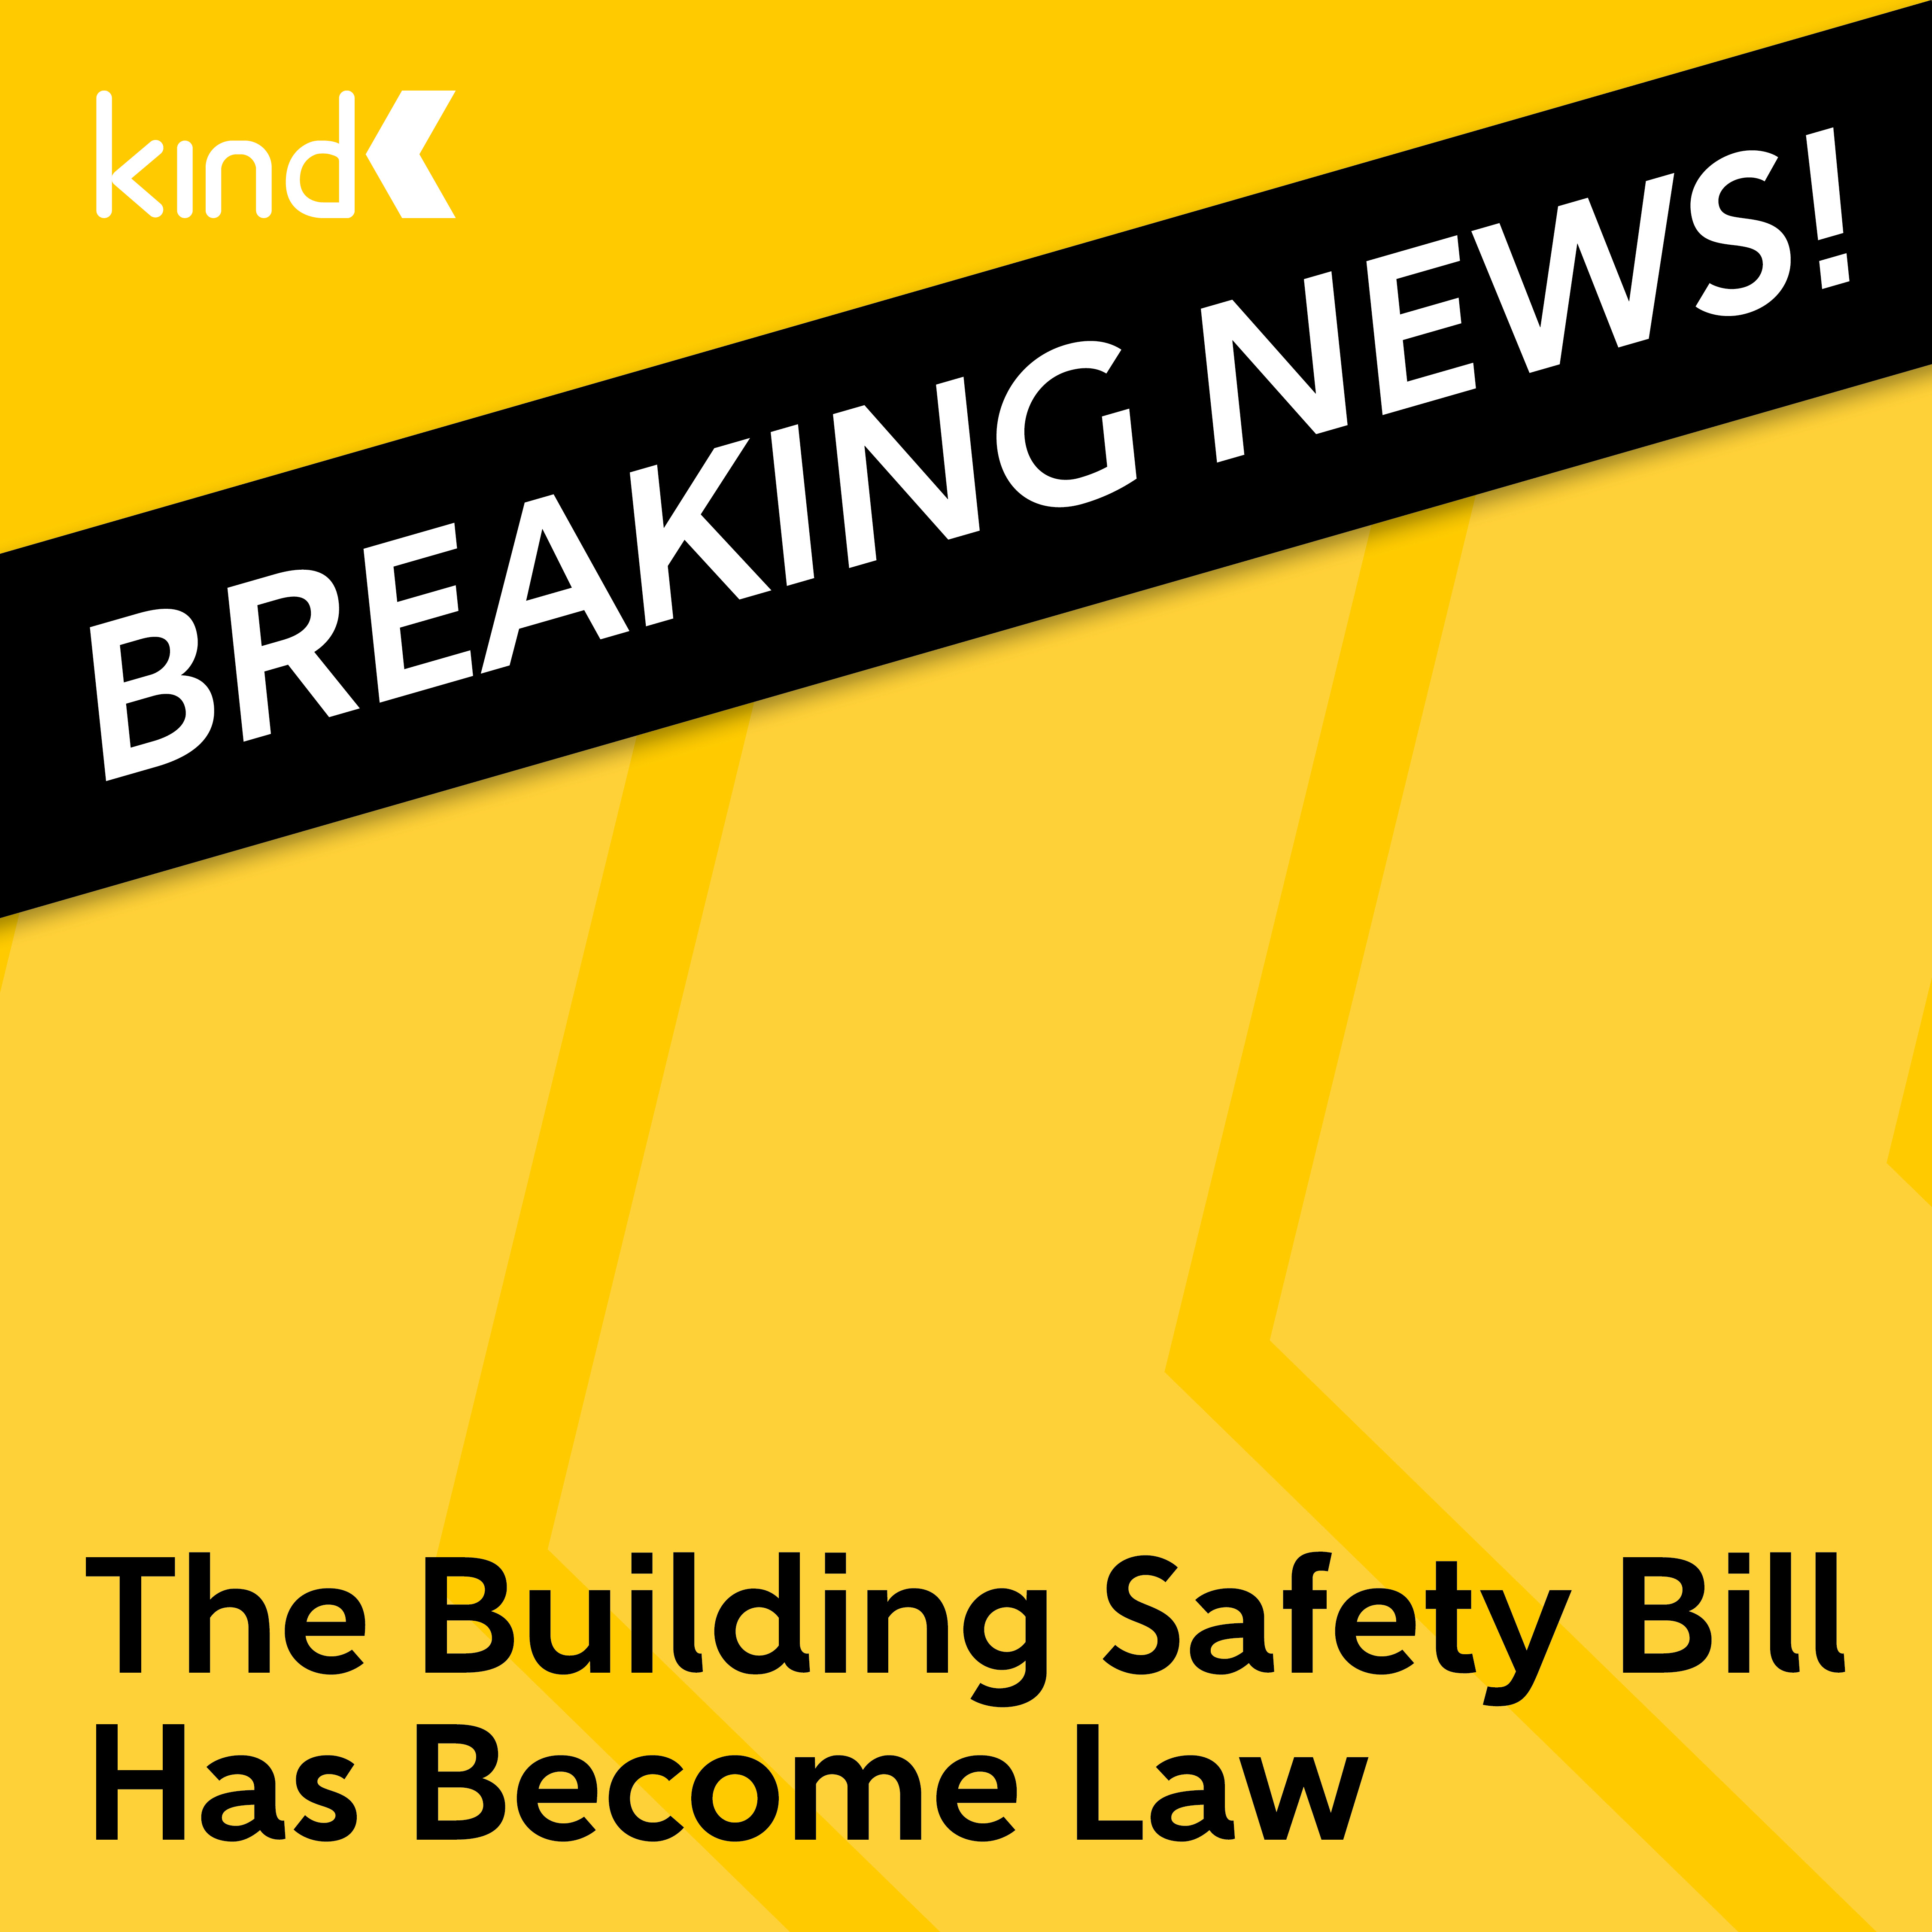 The Building Safety Bill Has Become Law image